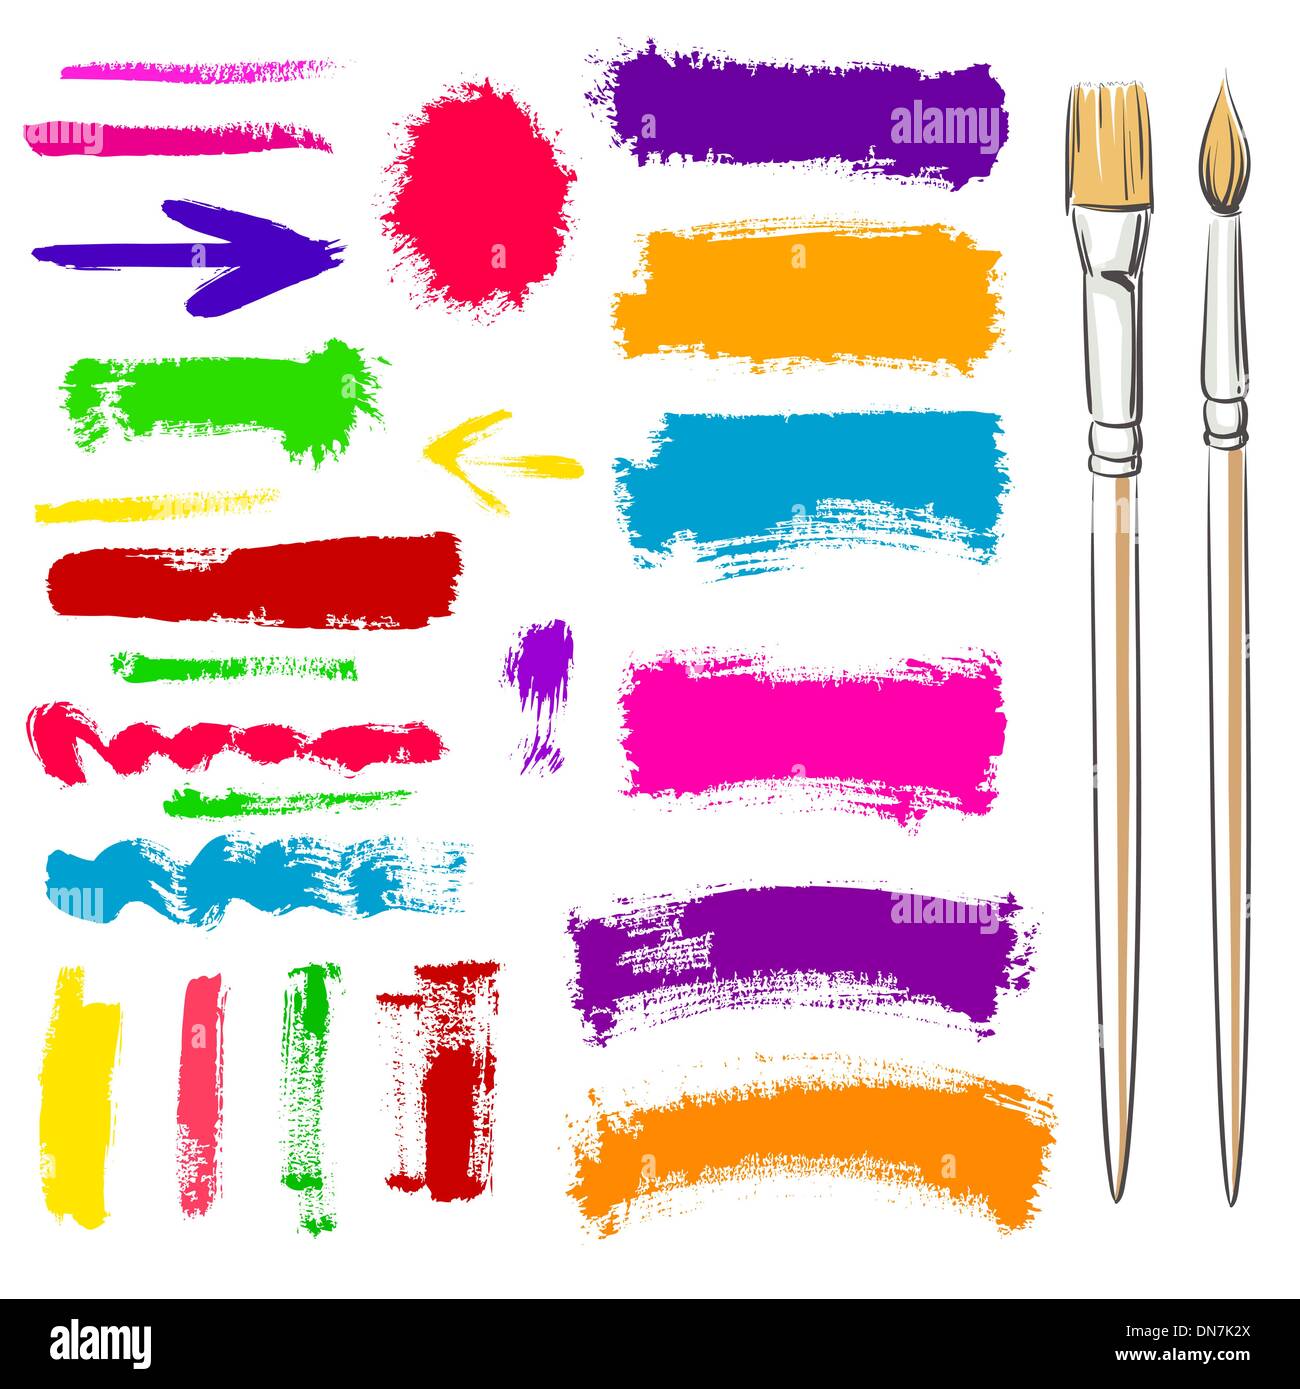 Brushes and grunge painted elements Stock Vector